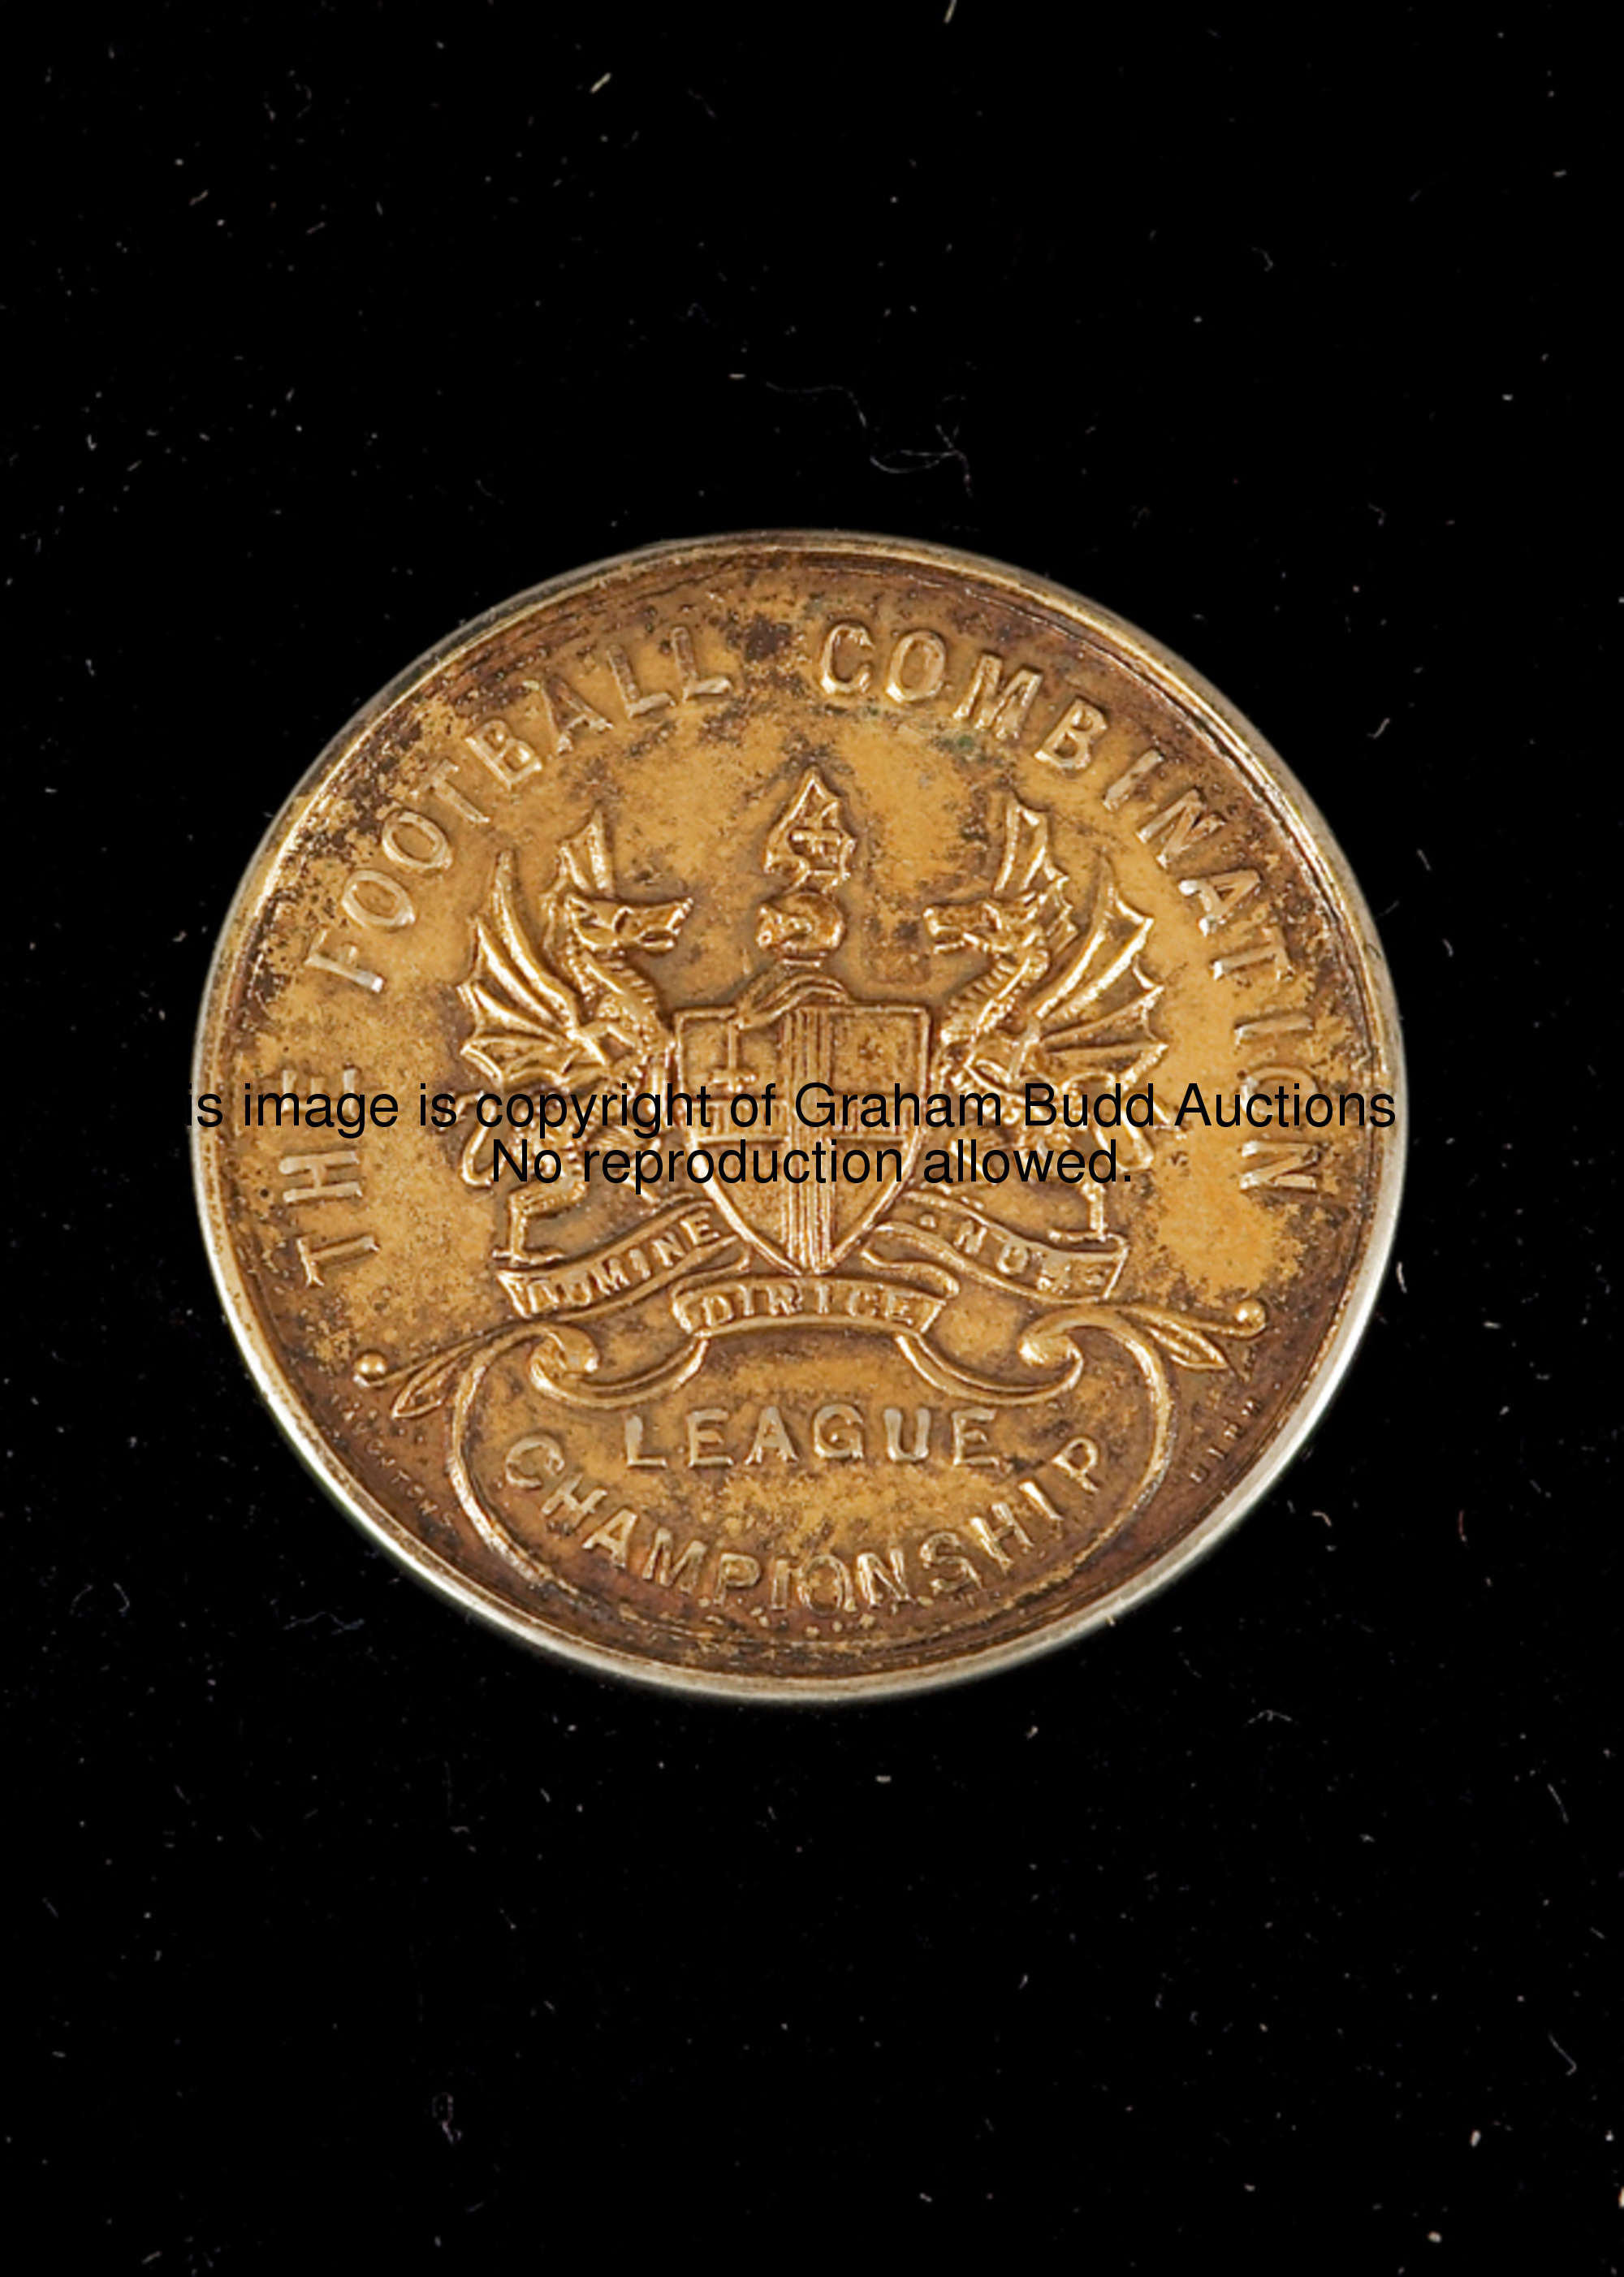 George Male's silver-gilt Football Combination League Championship runners-up medal season 1961-62, ...